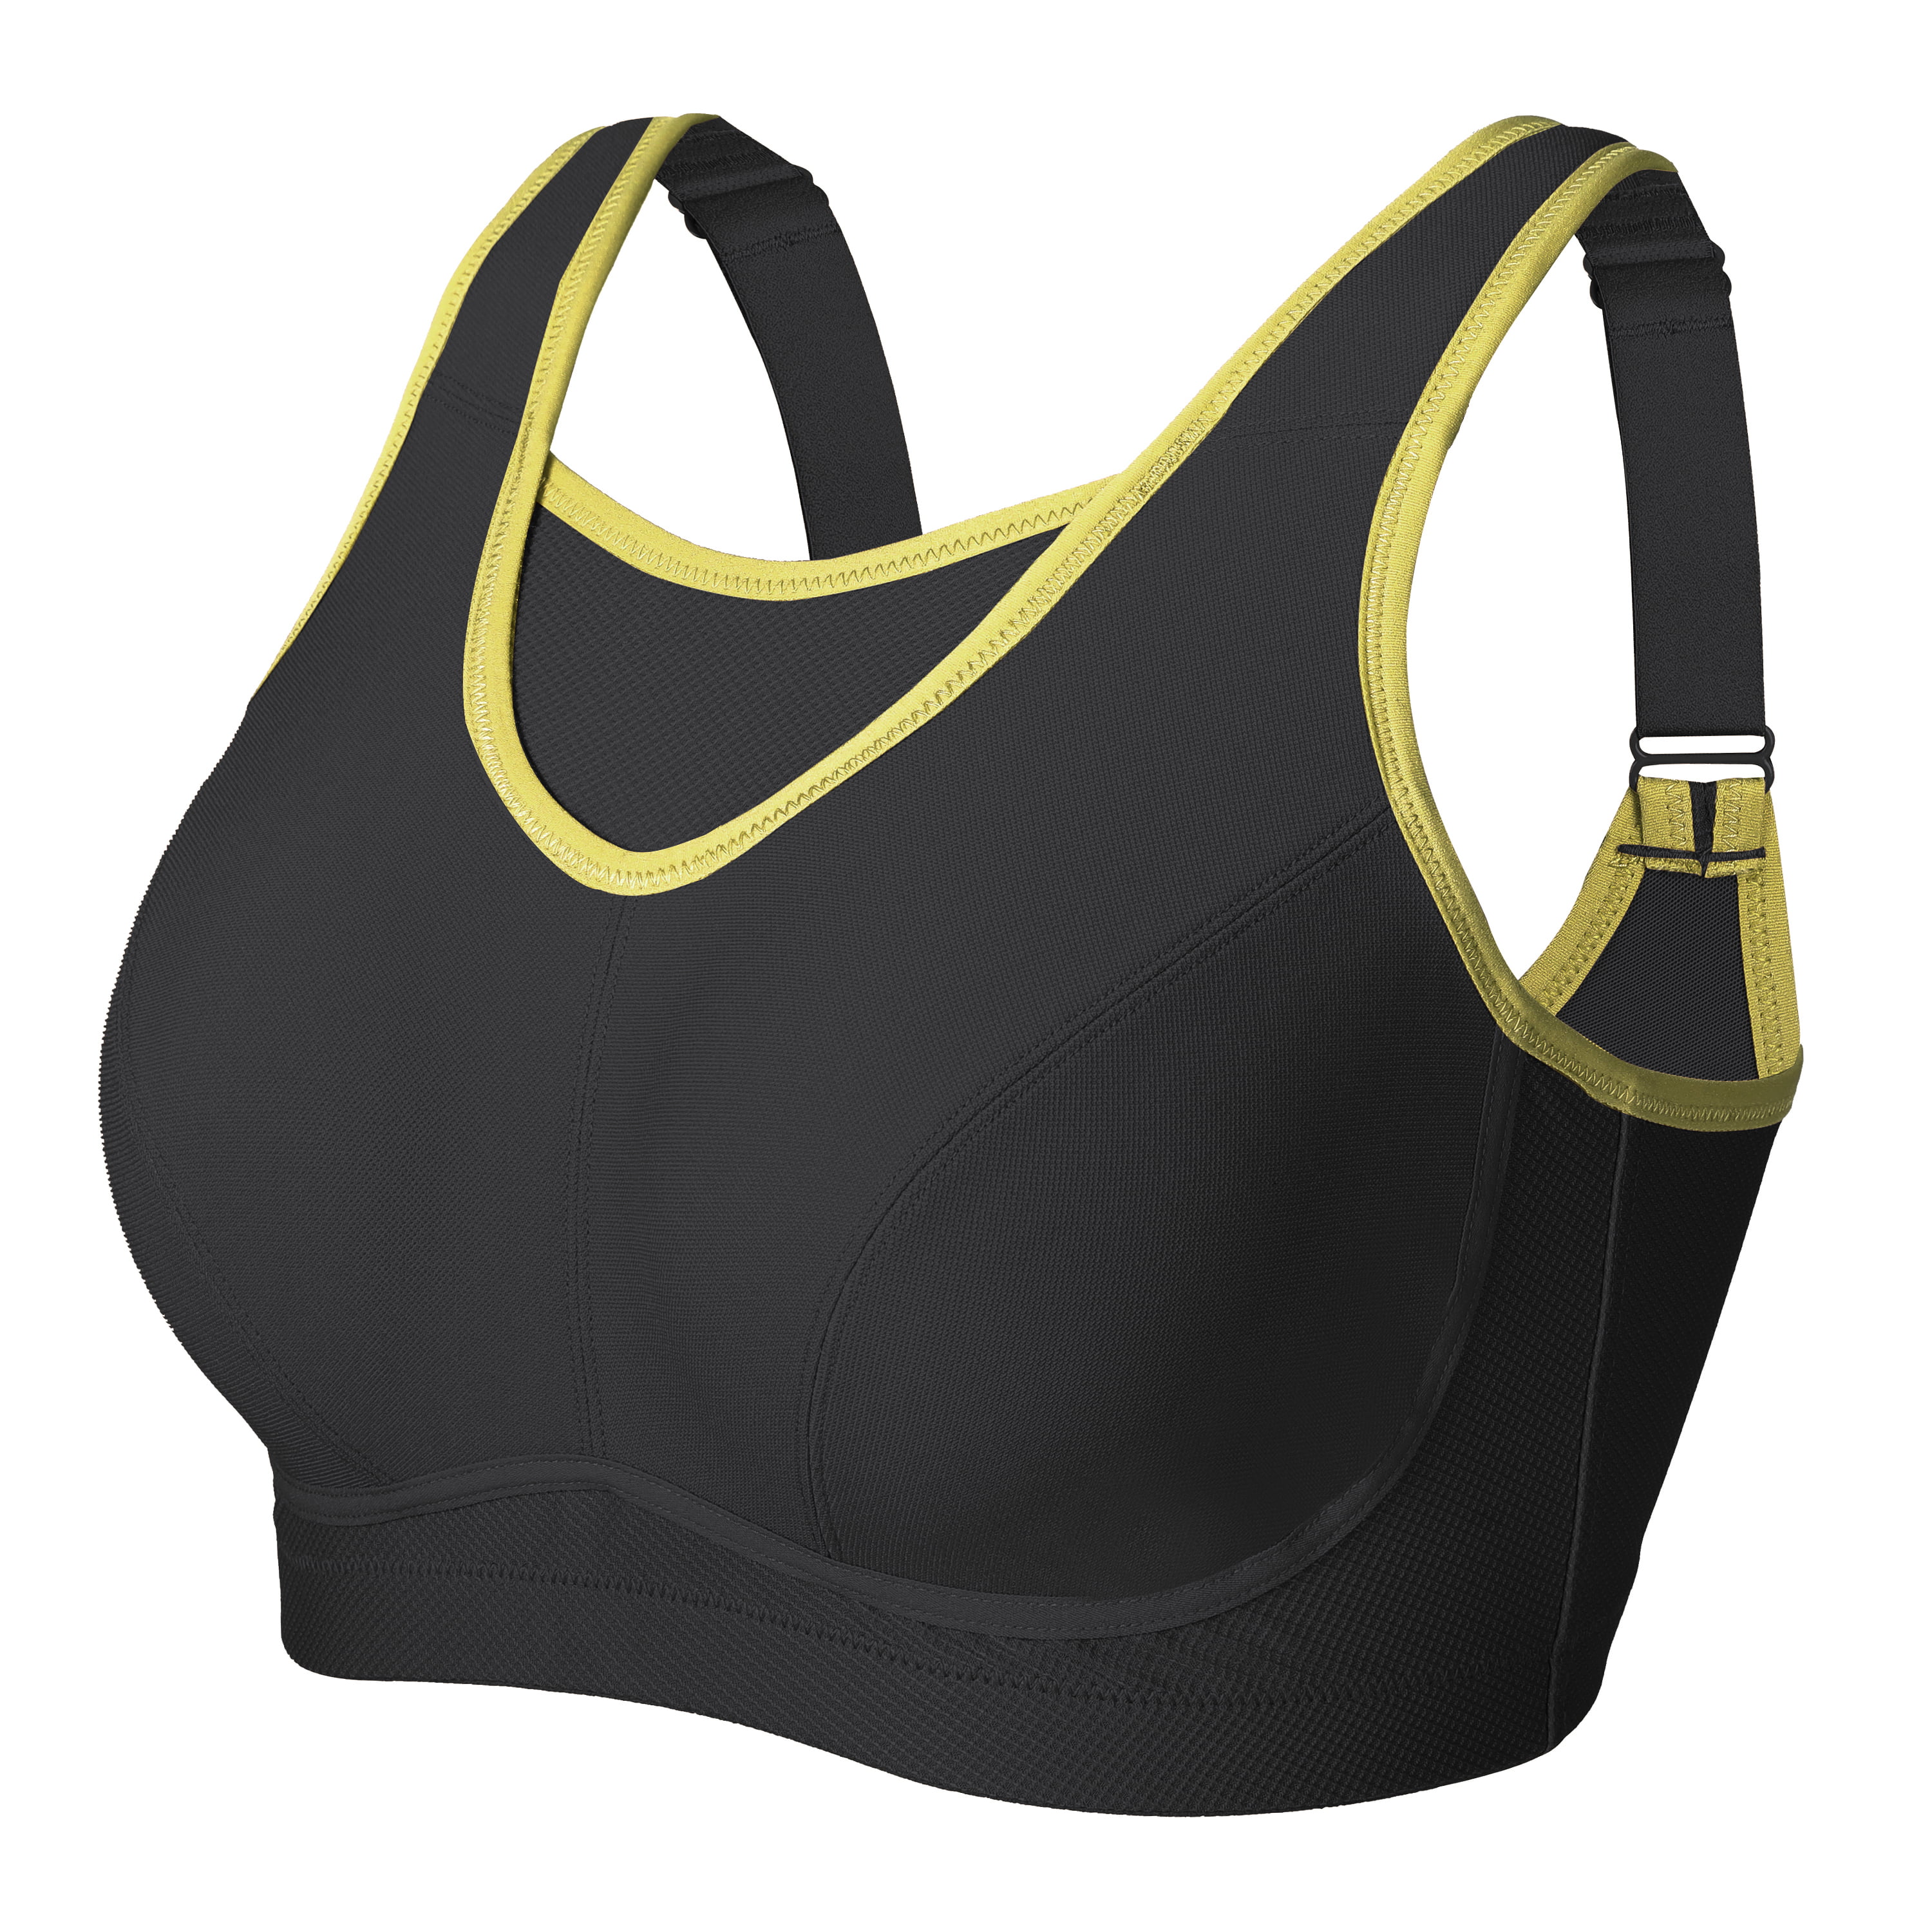 SYROKAN Women's High Impact Underwire Adjustable Straps High Support Plus Size Full Figure Padded Sports Bra